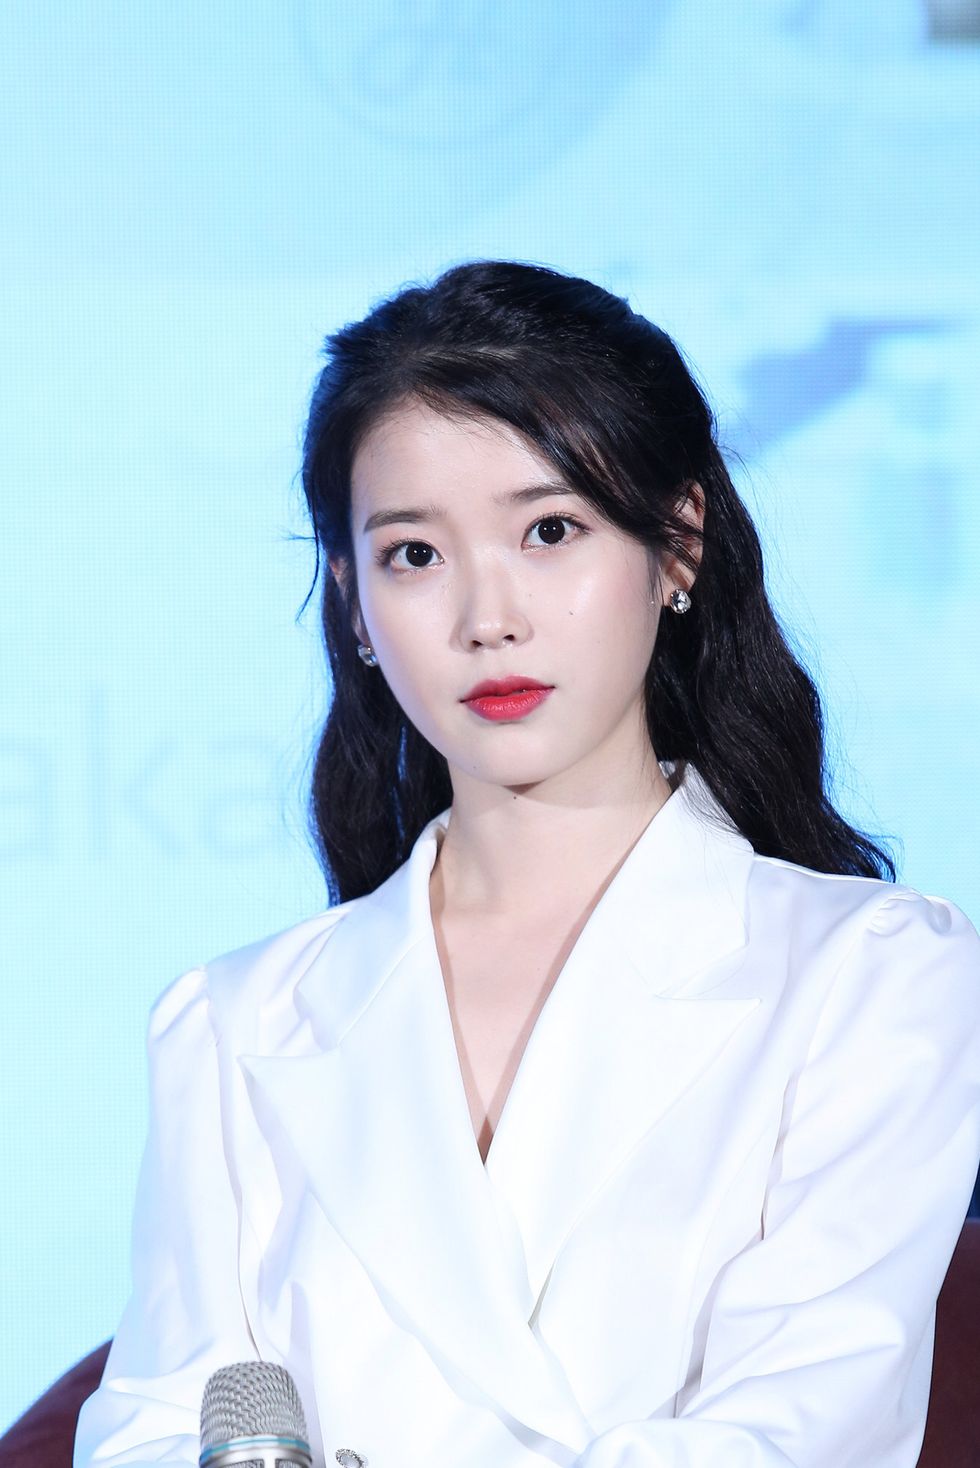 south korean singer iu attends press conference for her concert in taipei